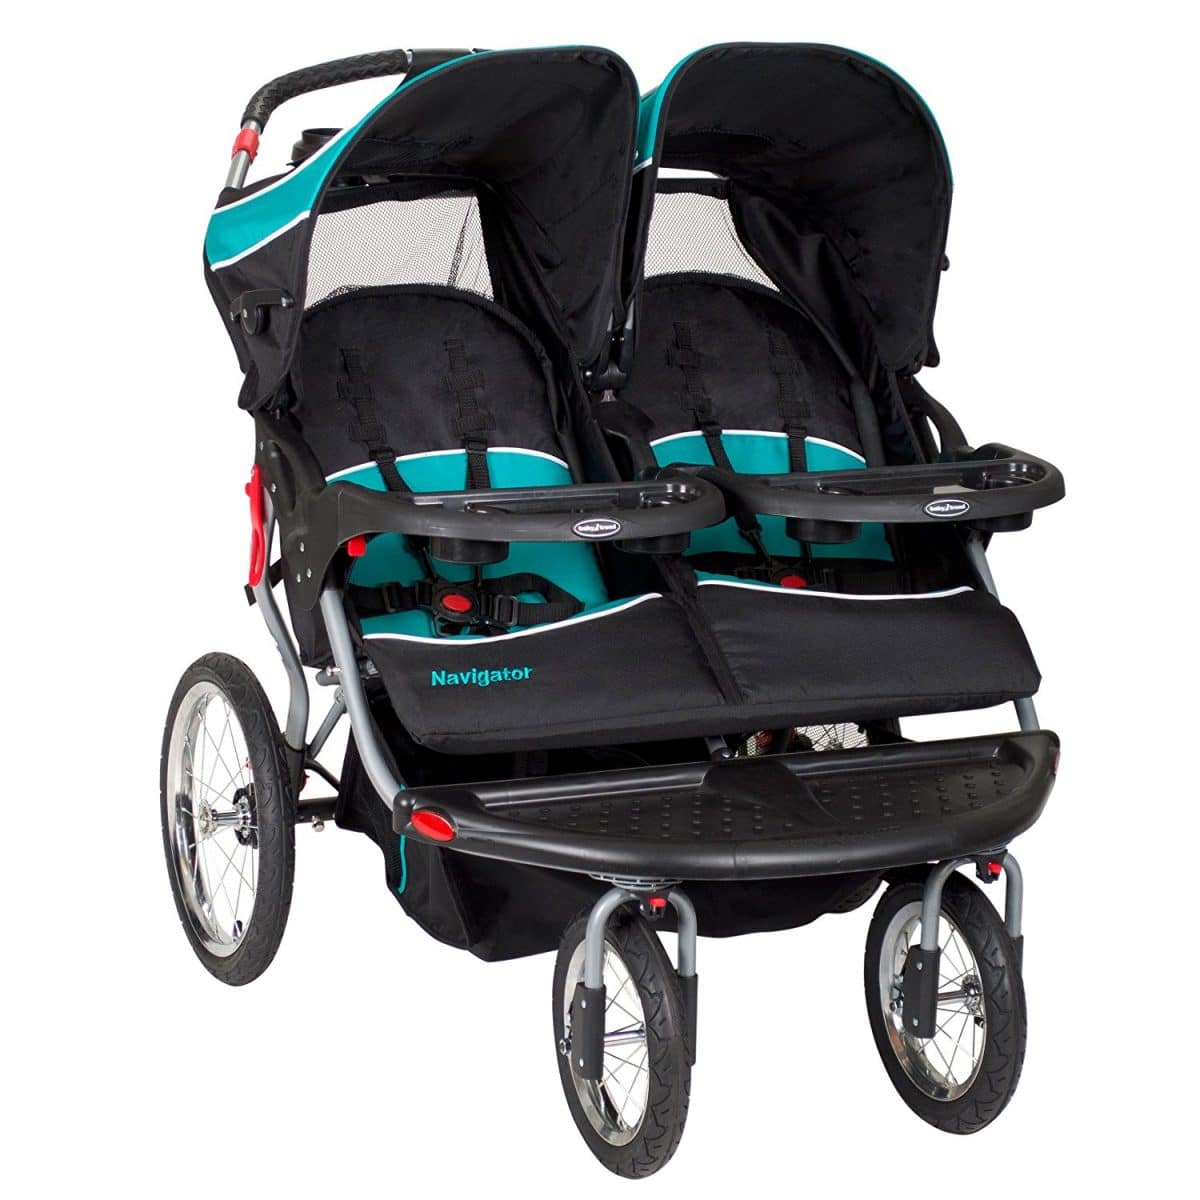 top double jogging strollers